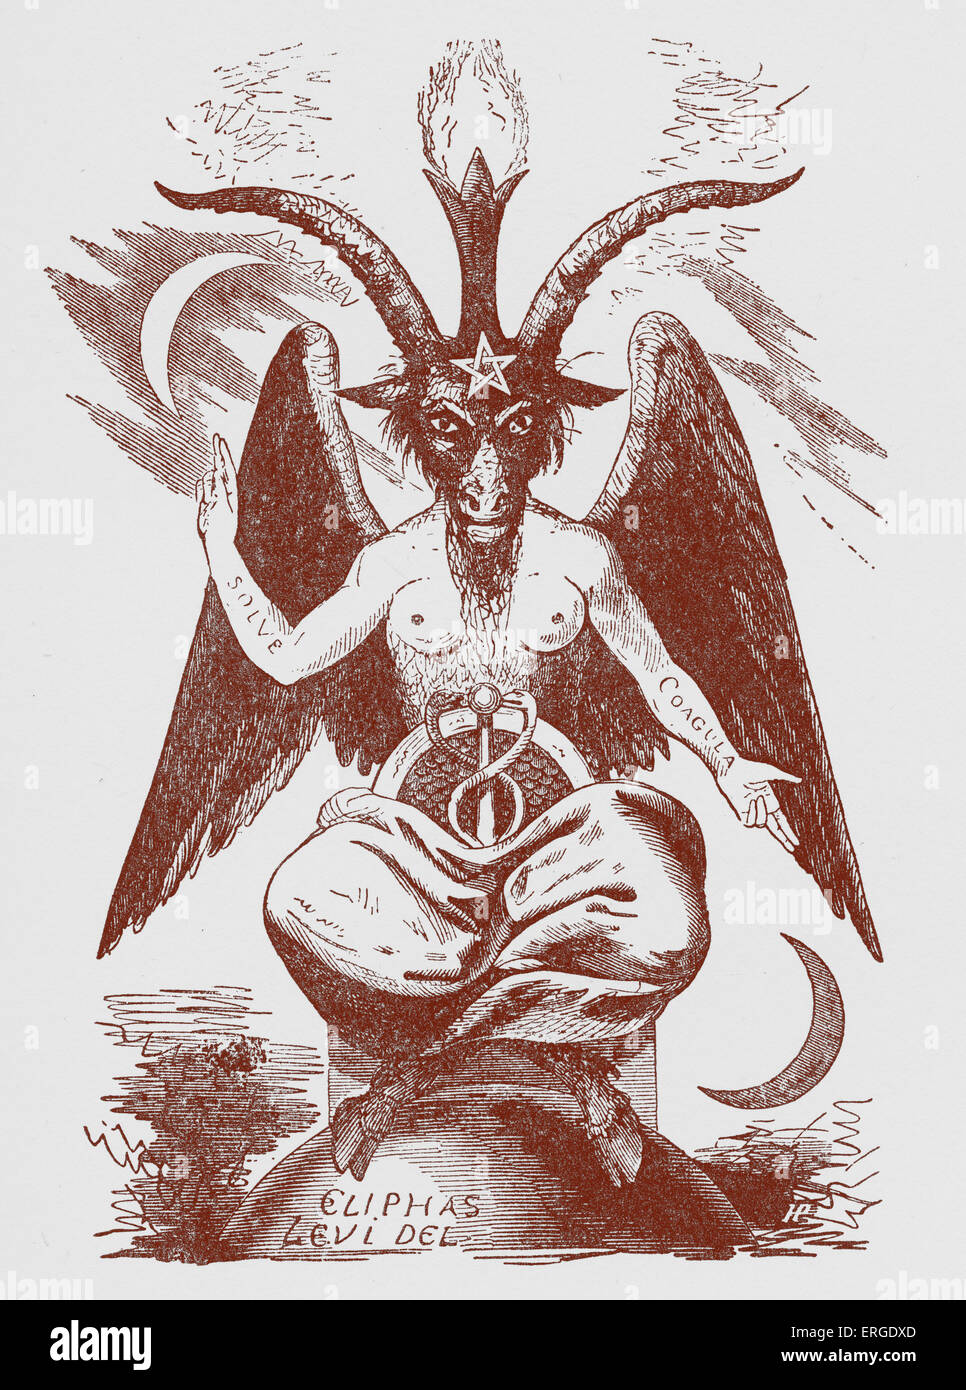 Baphomet - Pagan deity (i.e., a product of Christian folklore concerning pagans), revived in the 19th century as a figure of Stock Photo